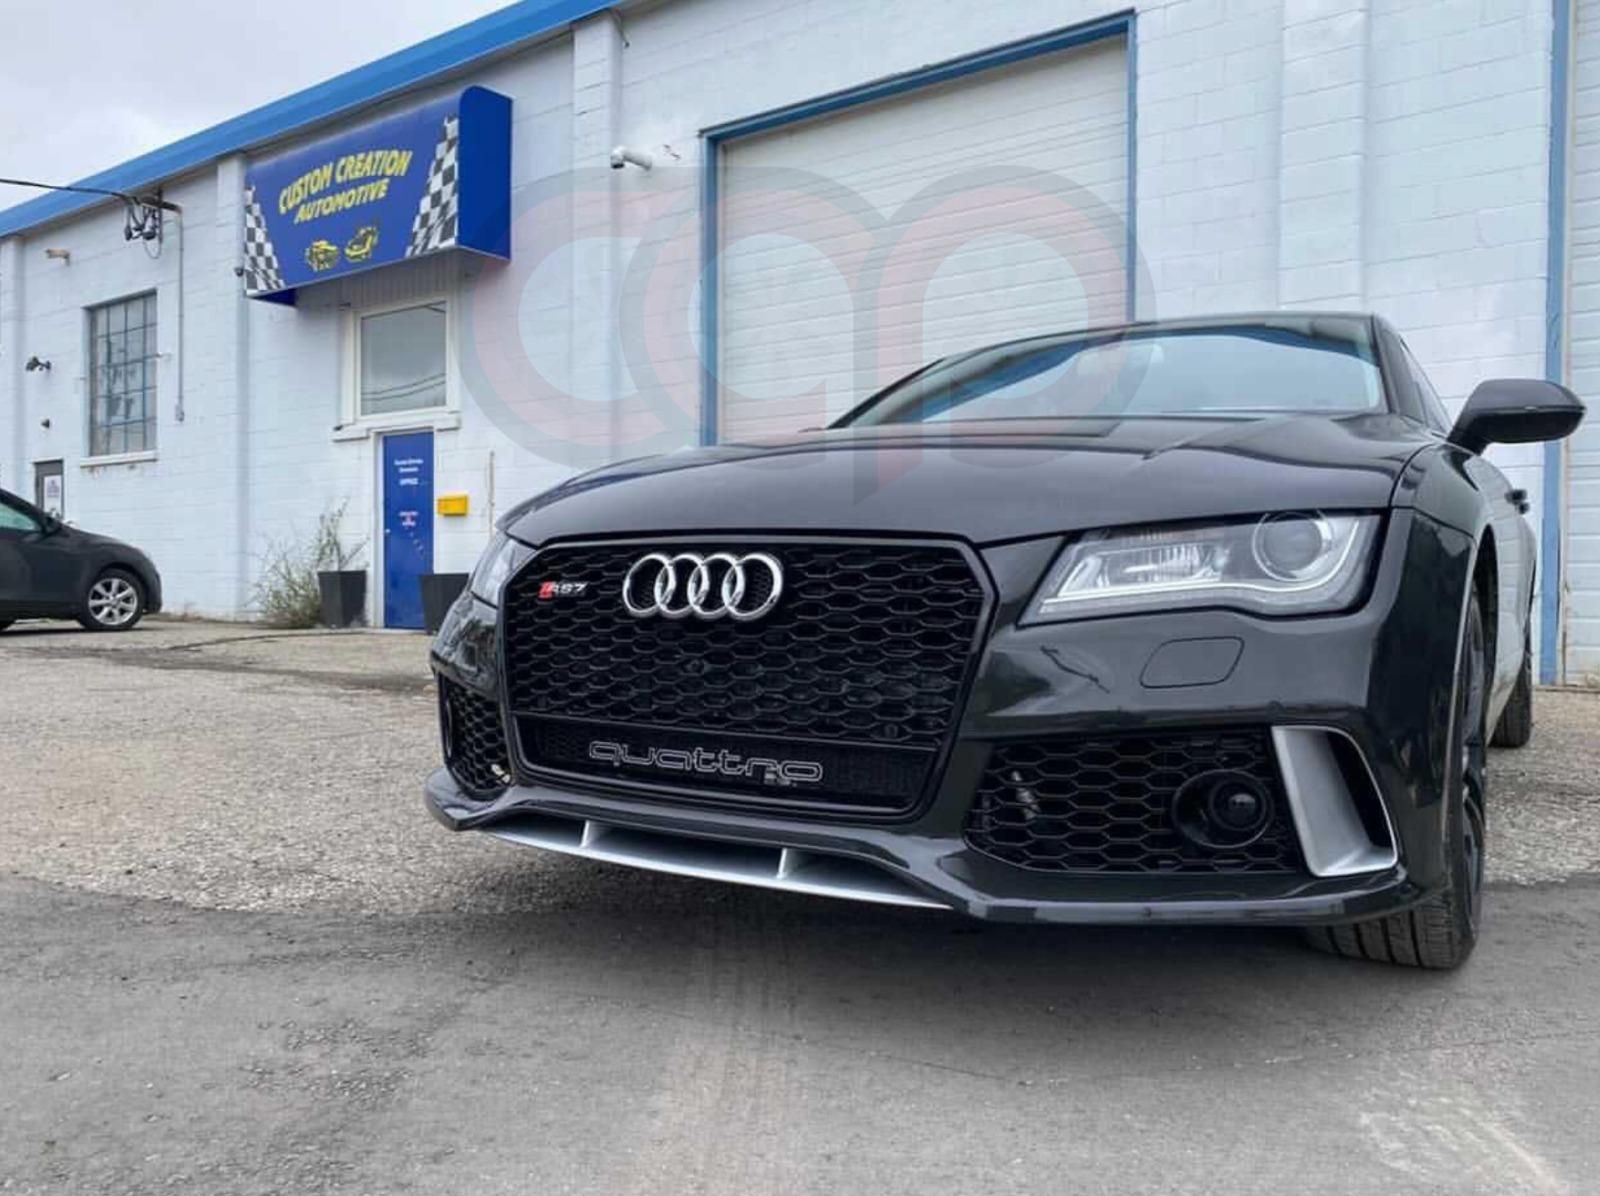 pre facelift audi a7 aftermarket parts, bumper, grill, bodykit, mirrors and side skirts